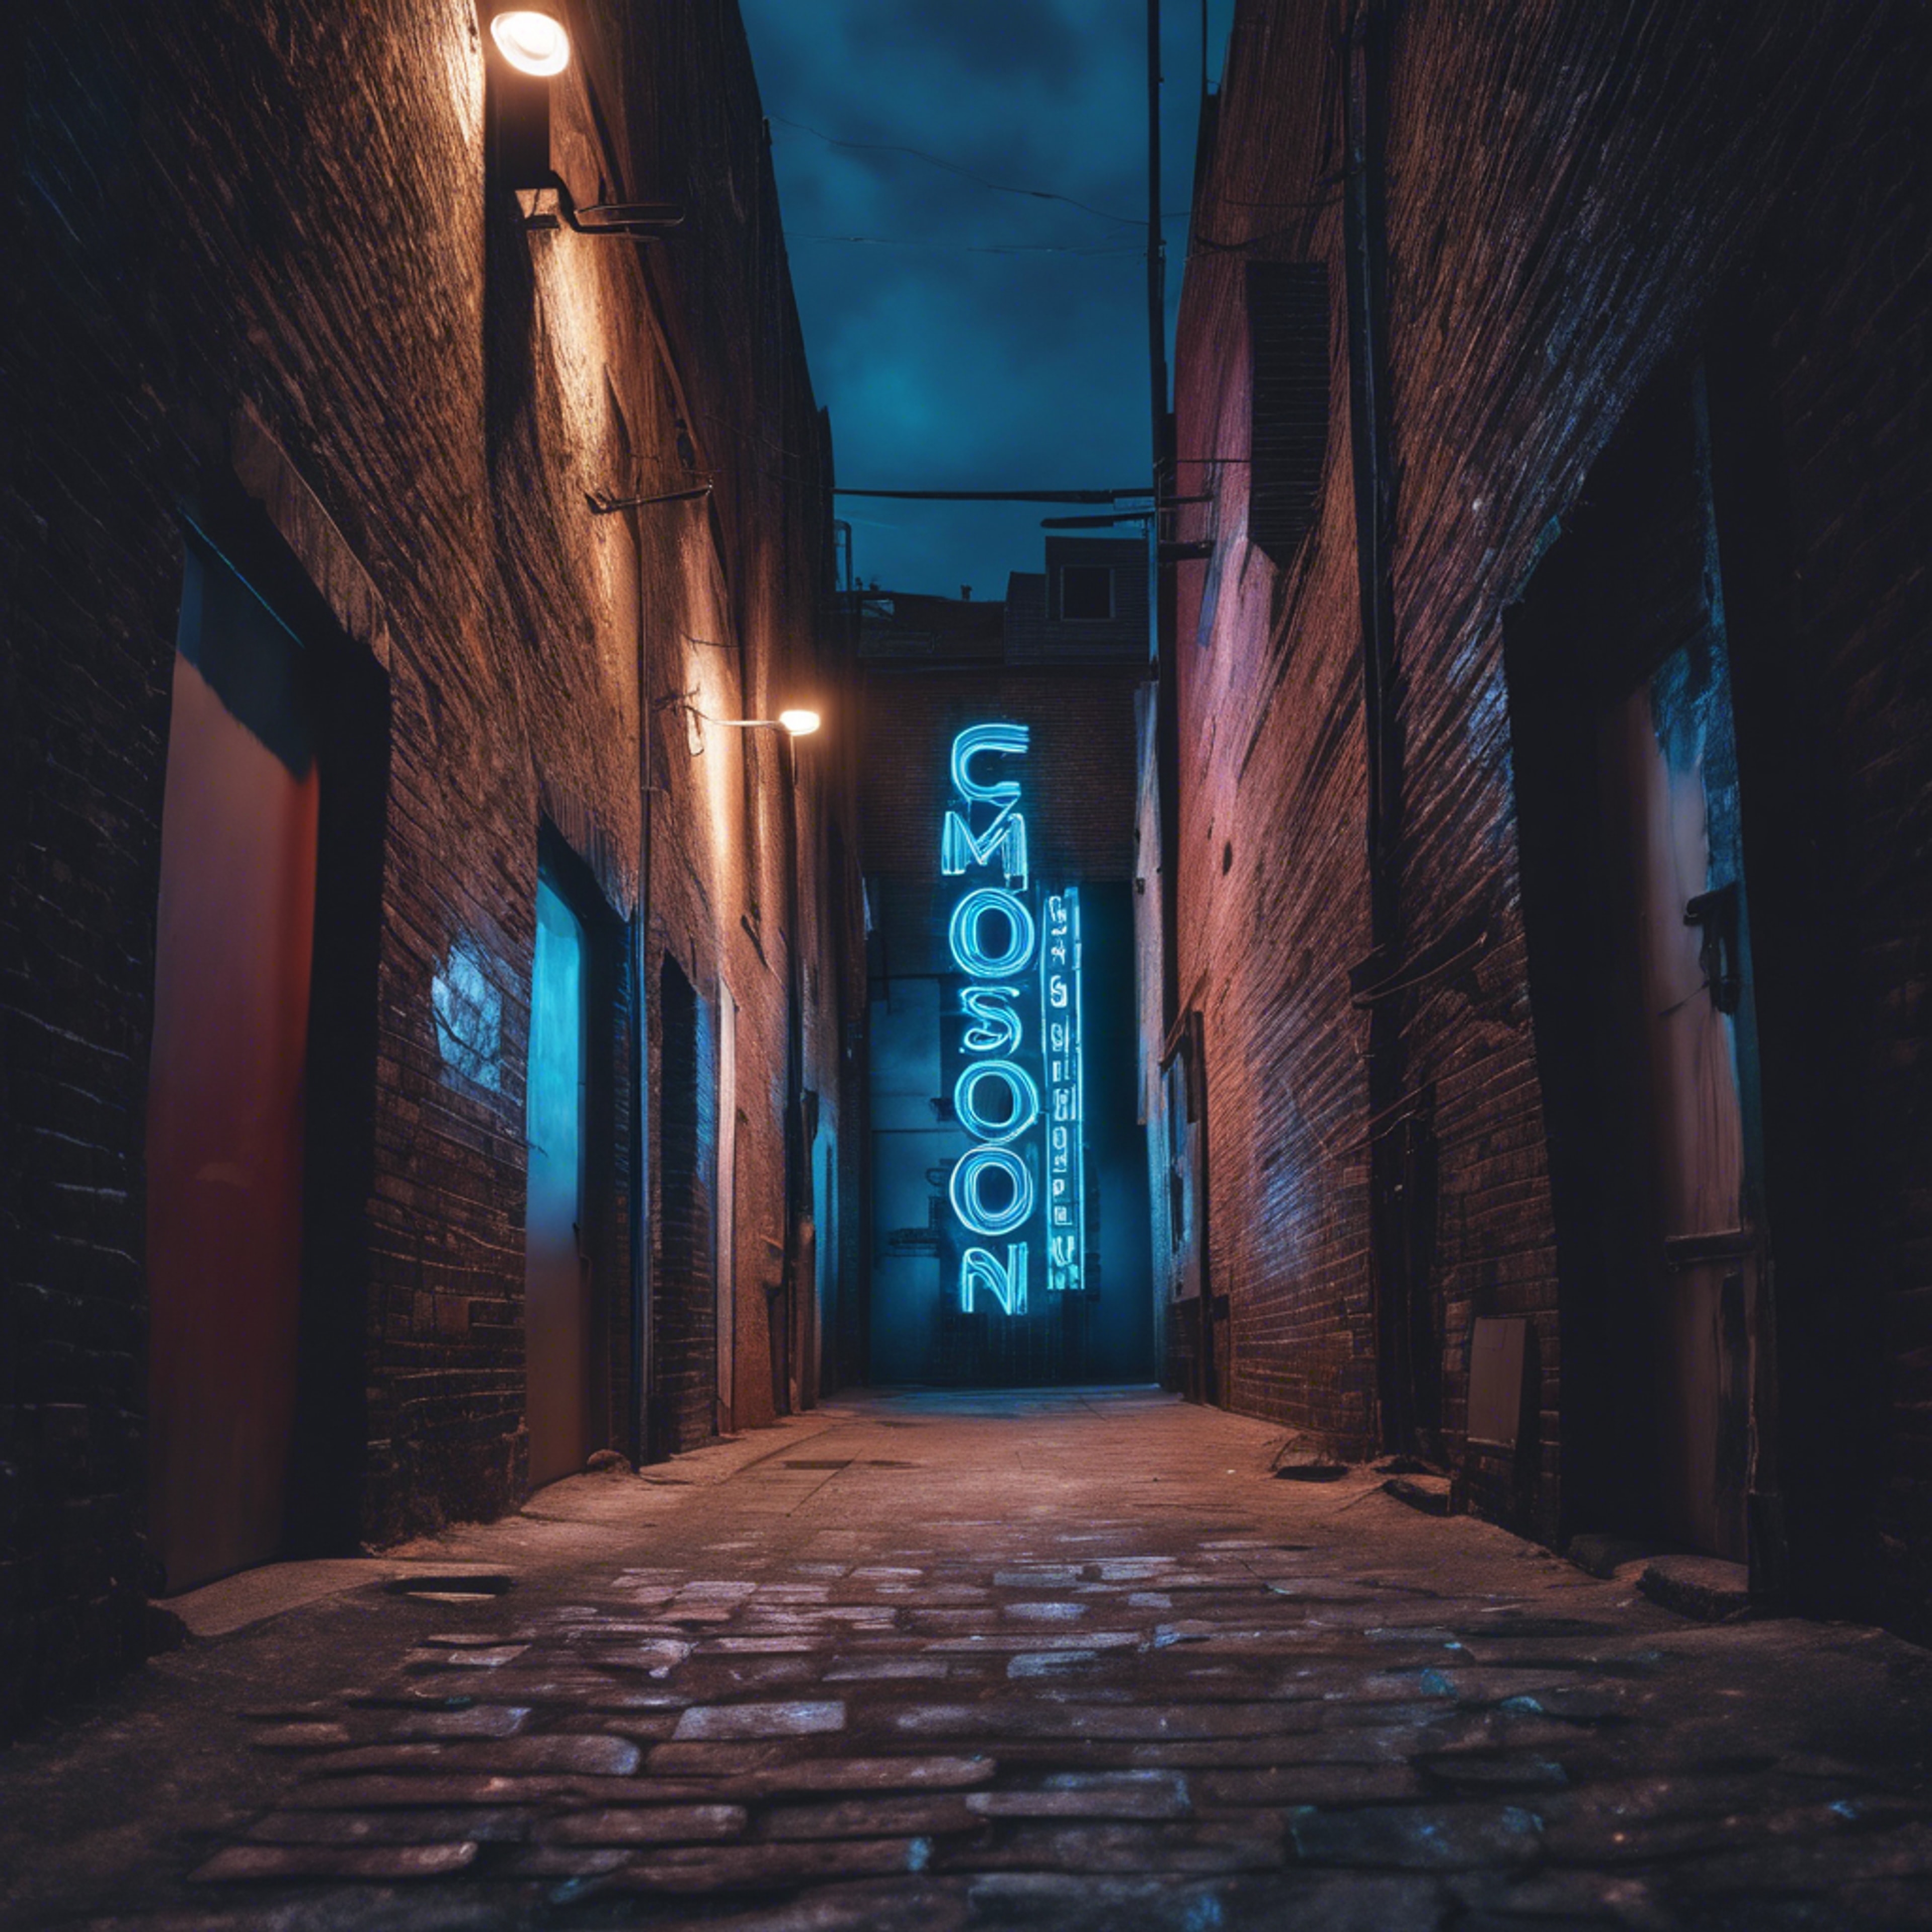 A cool blue neon sign glowing in a dark alley Tapeta[2a7b25783bff4a339087]